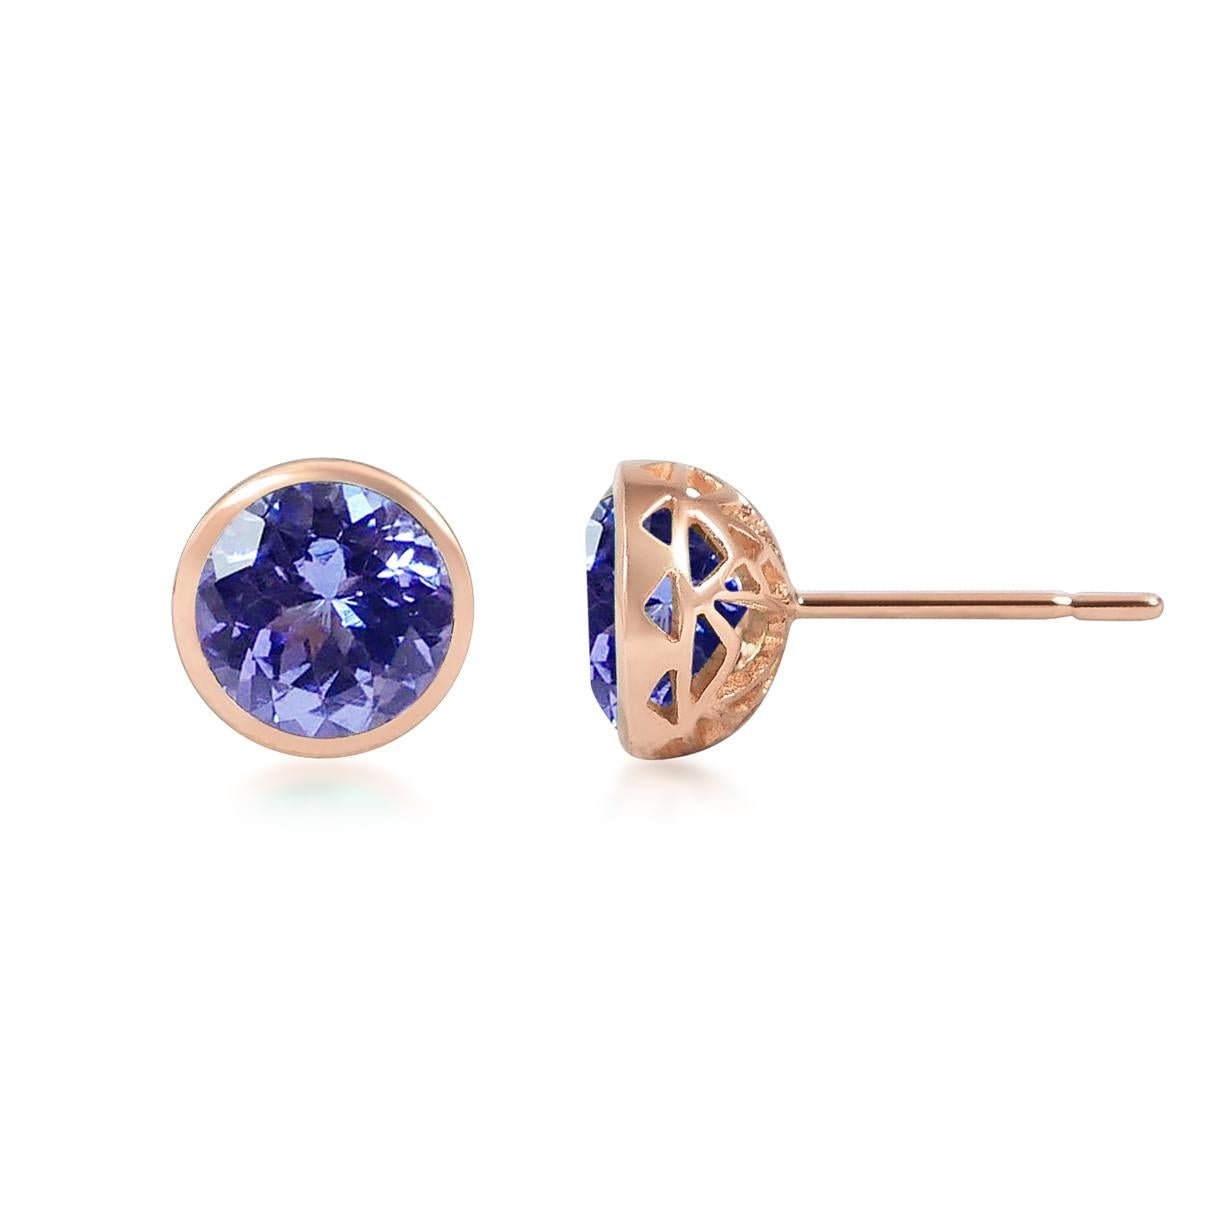 Handcrafted 2.80 Carats Tanzanite 18 Karat Rose Gold Stud Earrings. The 8mm natural stones are set in our iconic hand pierced gold lace to let the light through our precious and fine stones our earrings are the perfect everyday wear.

This unique